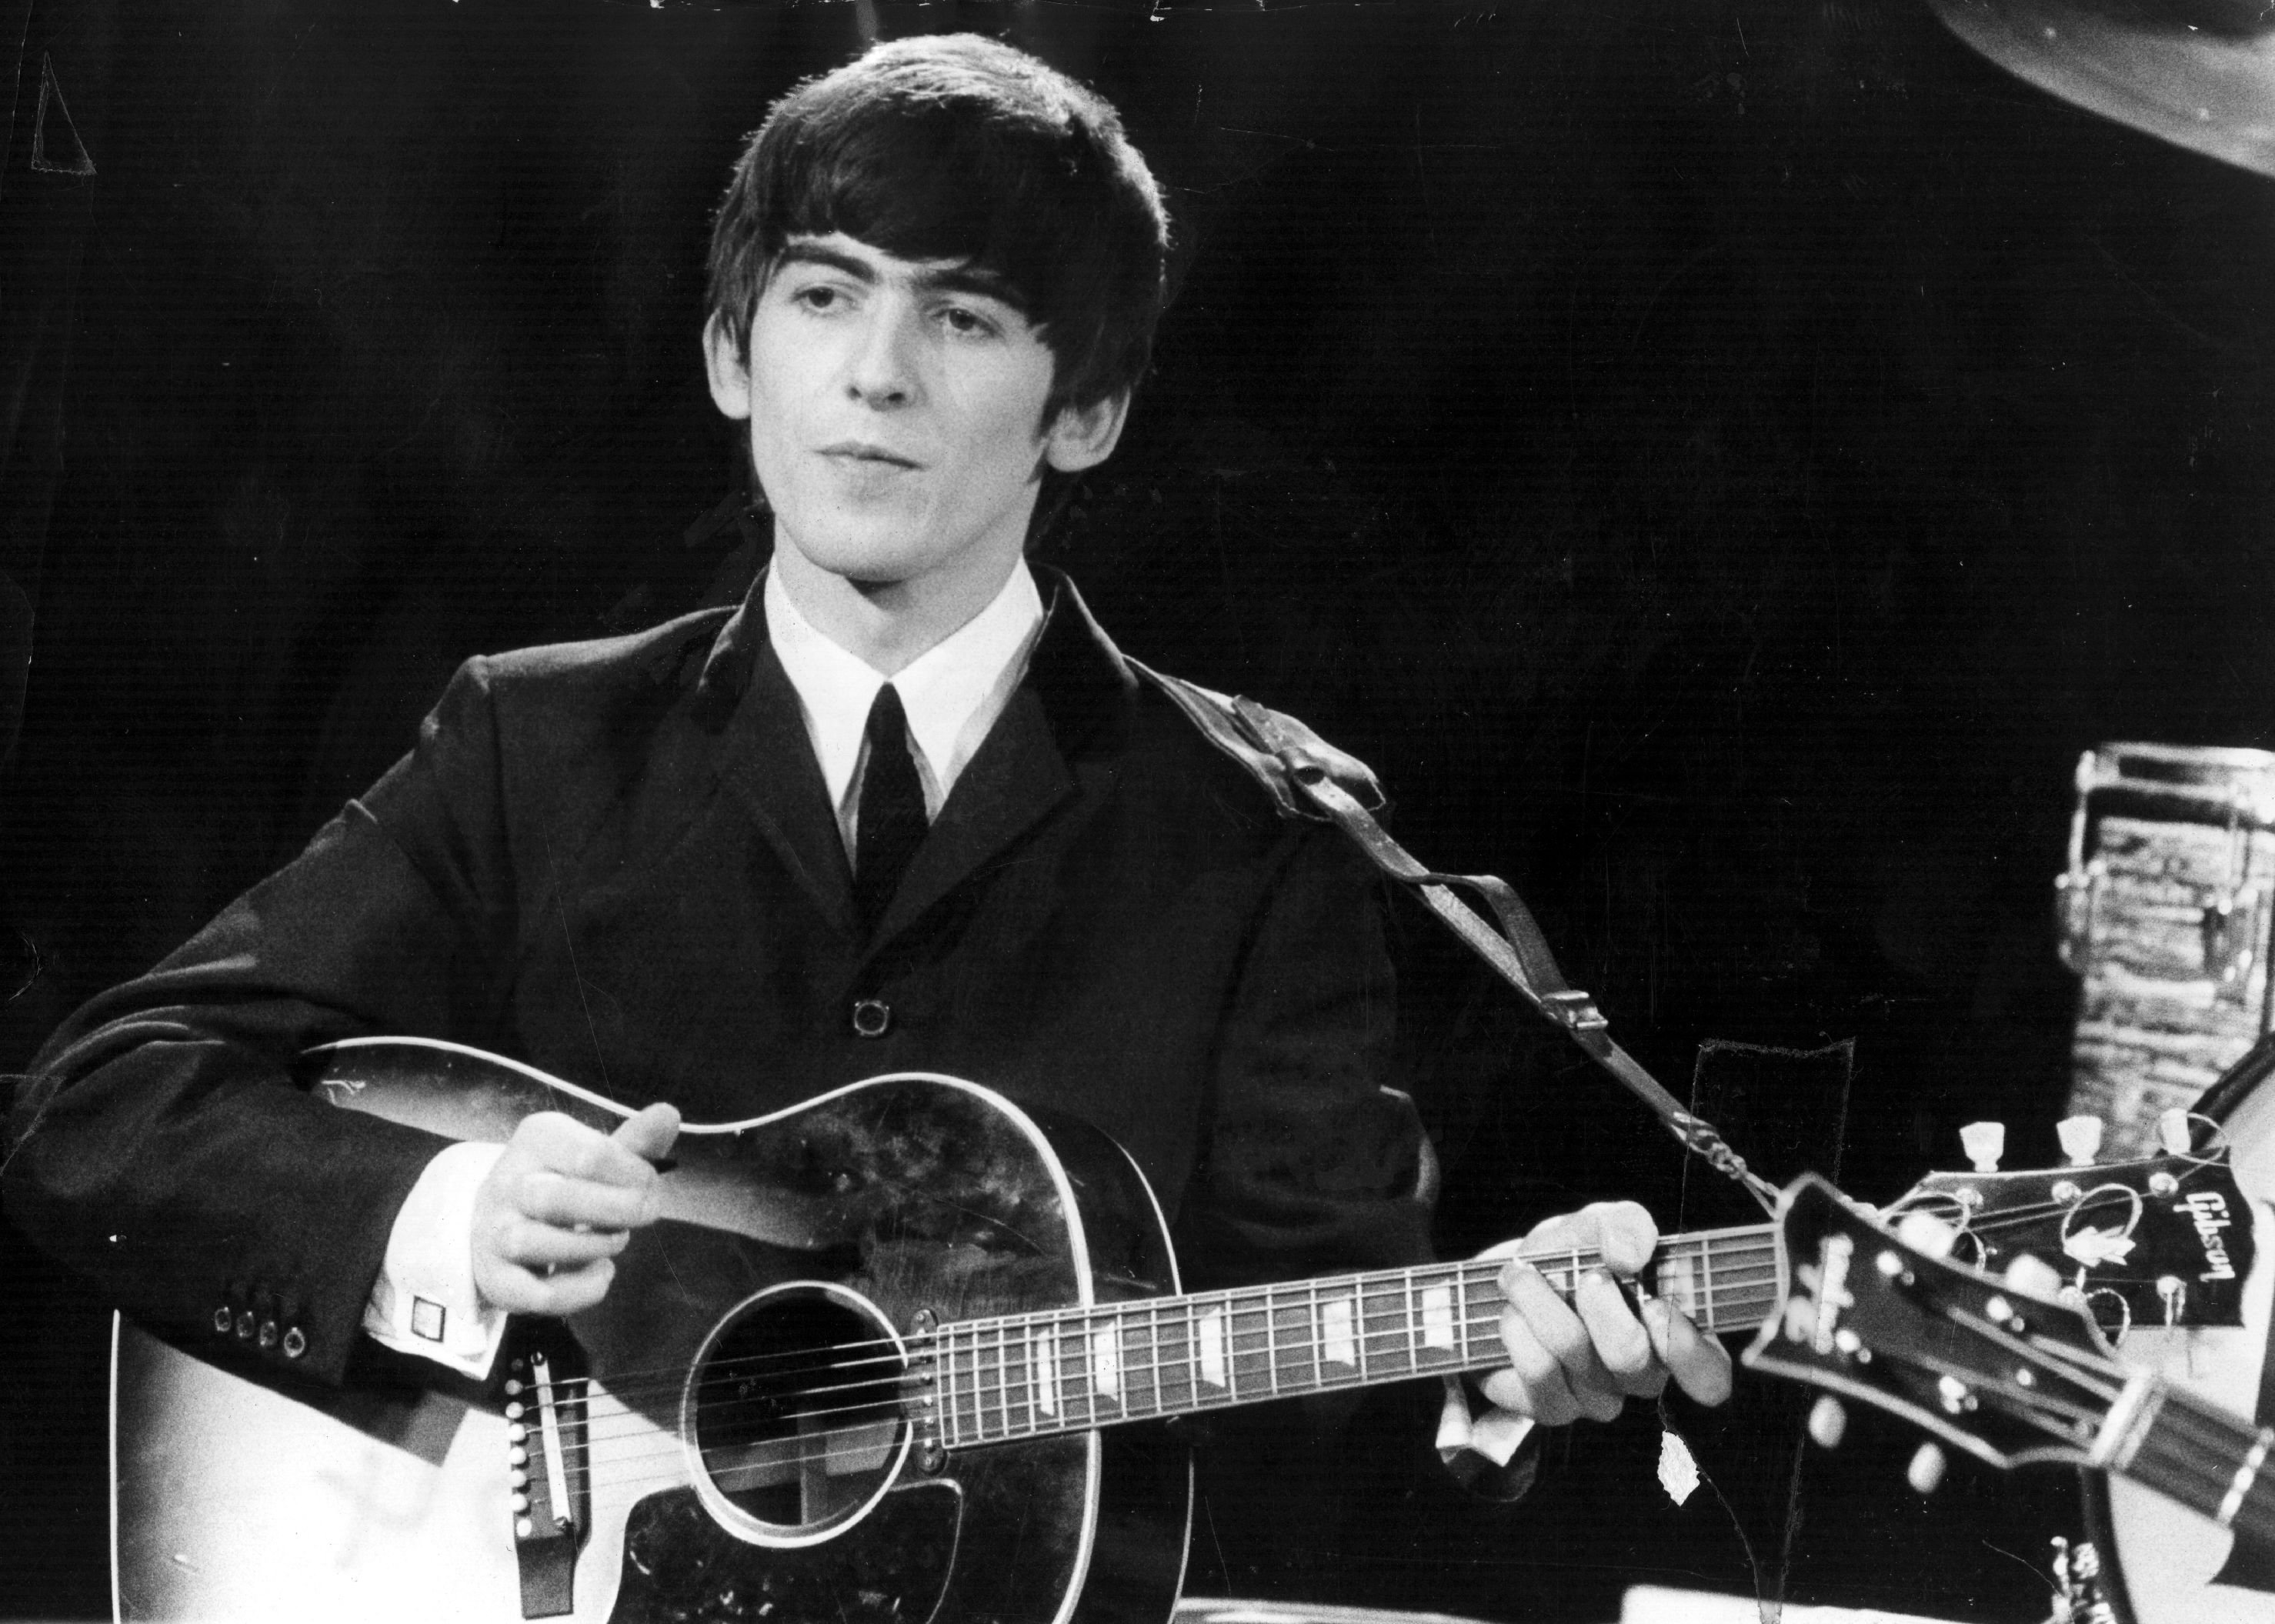 A black and white picture of George Harrison wearing a suit and playing guitar.